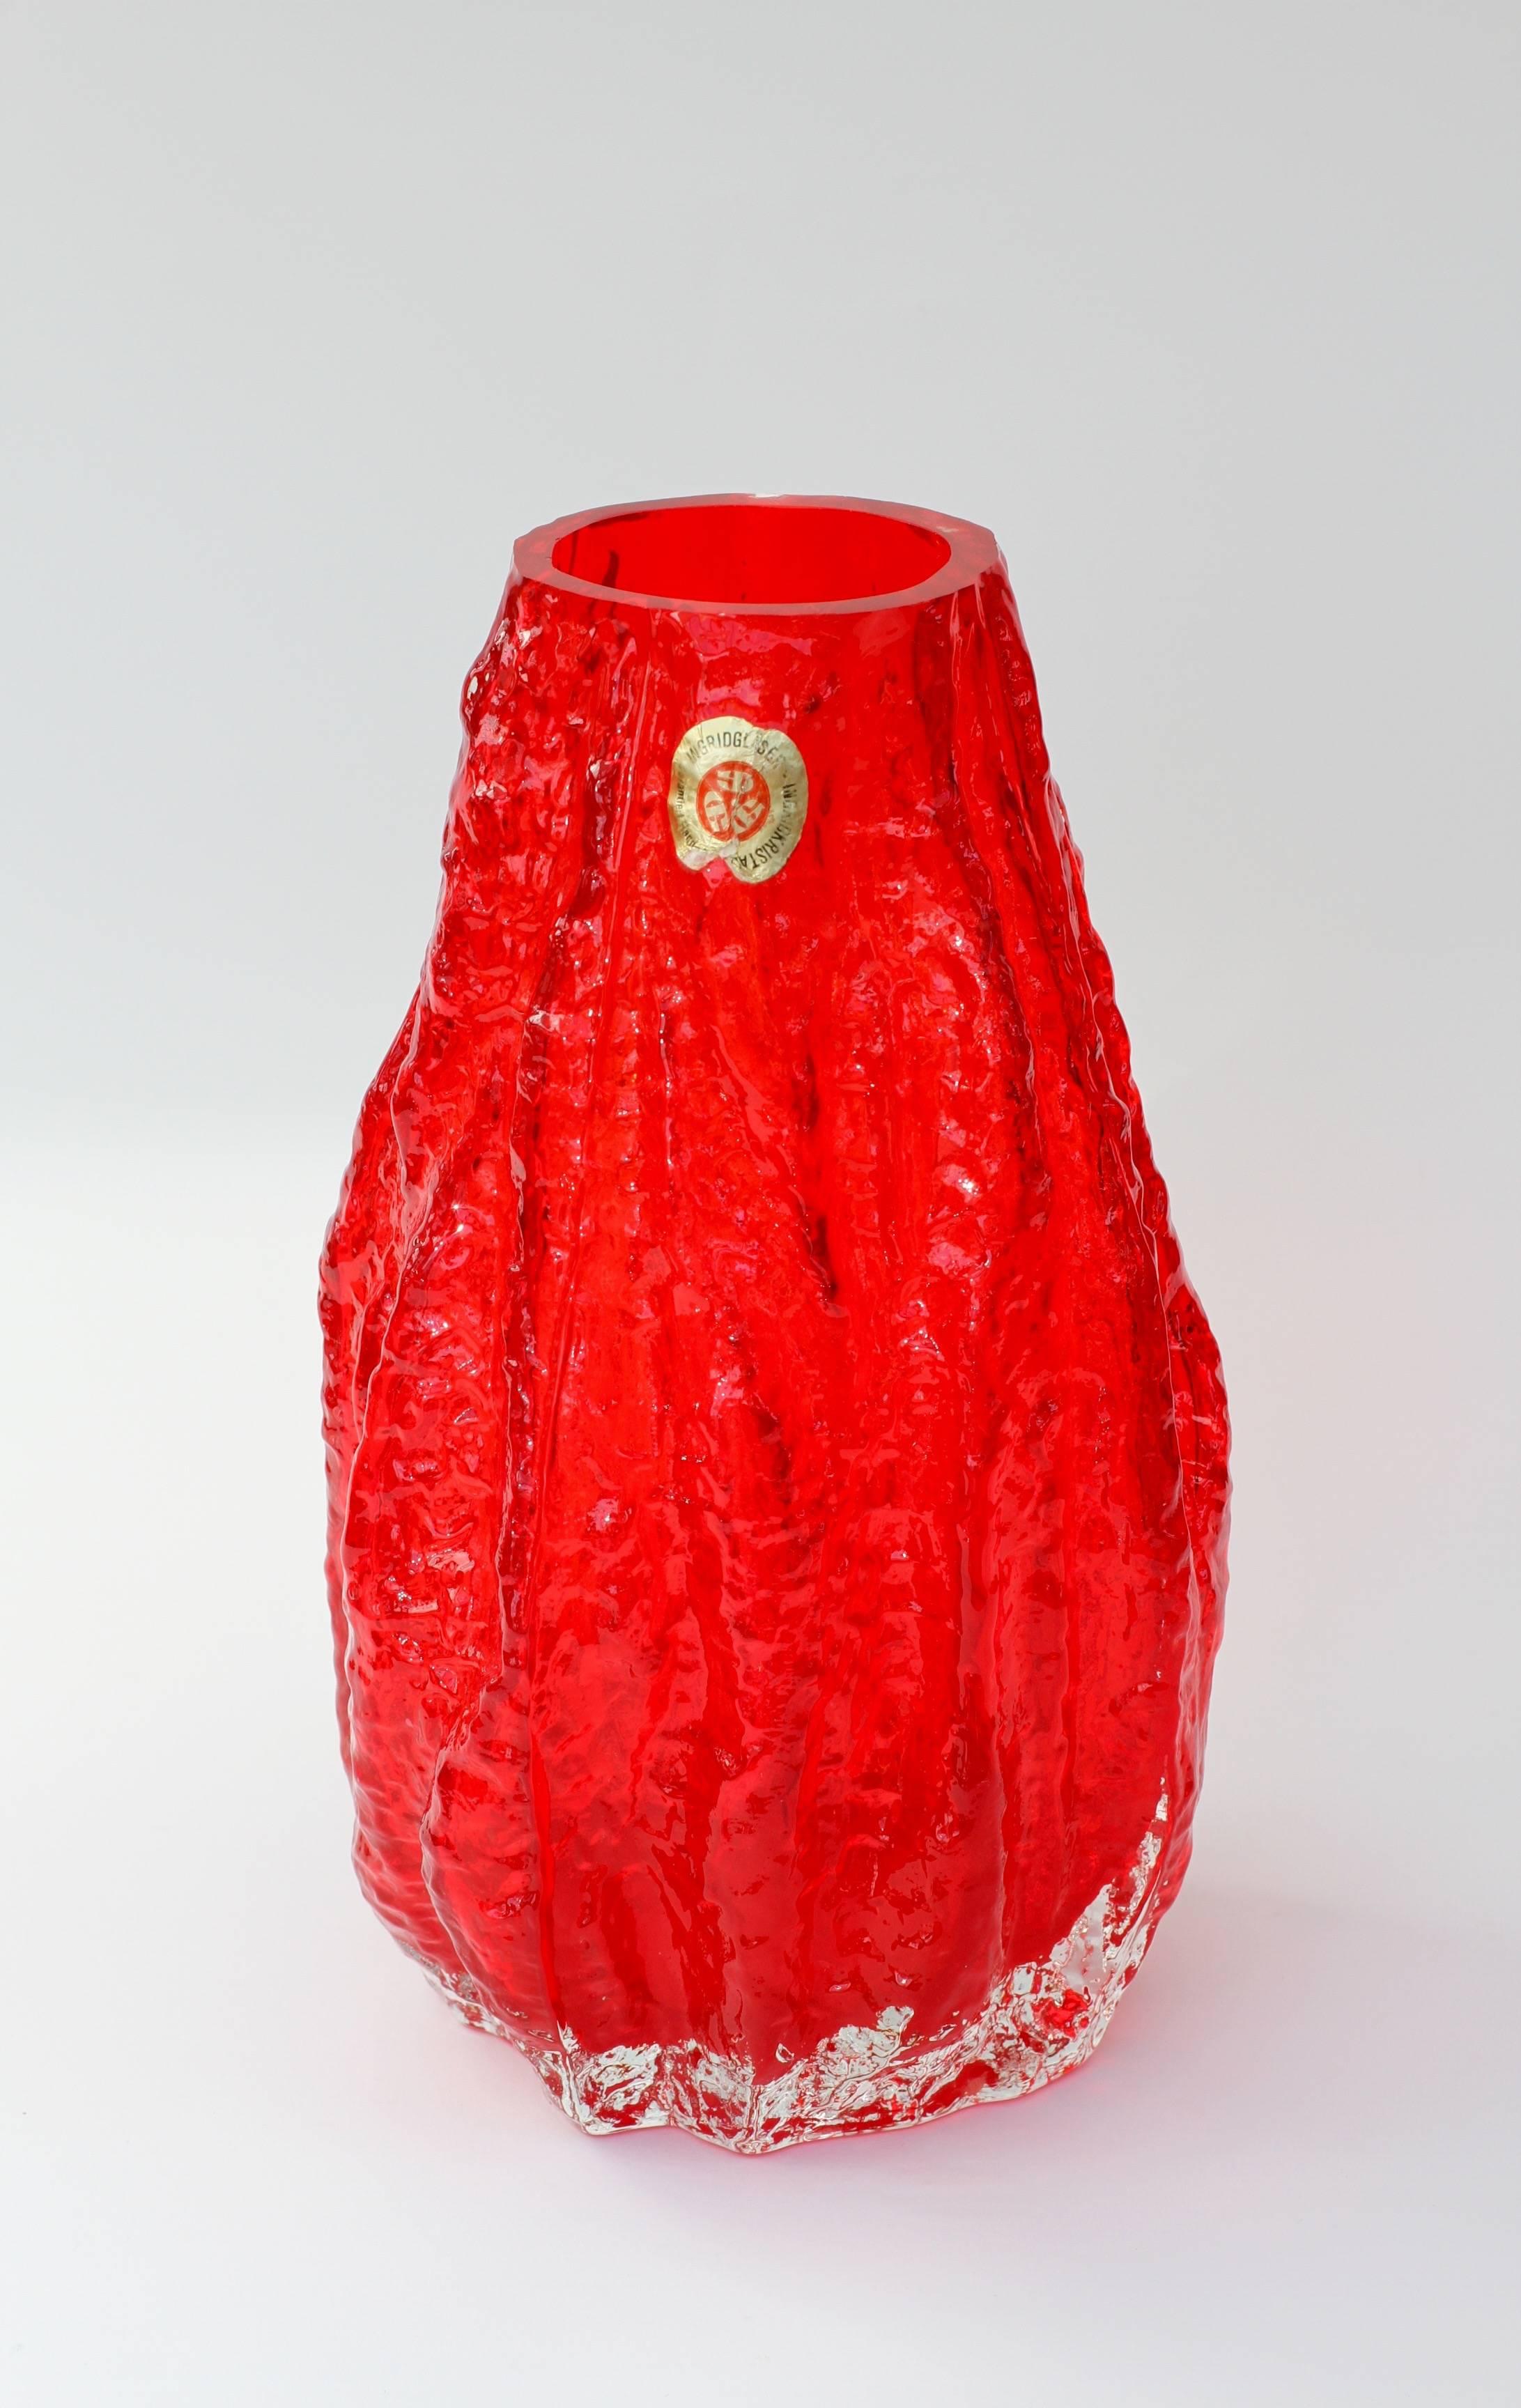 Wonderful Mid-Century Modern German vase by Ingrid Glas, circa 1970. This beautiful bright red vase brings a touch of fun and fantasy to any room with it's whimsical textured 'tree bark' form captured in vivid, vibrant red coloured / colored mouth